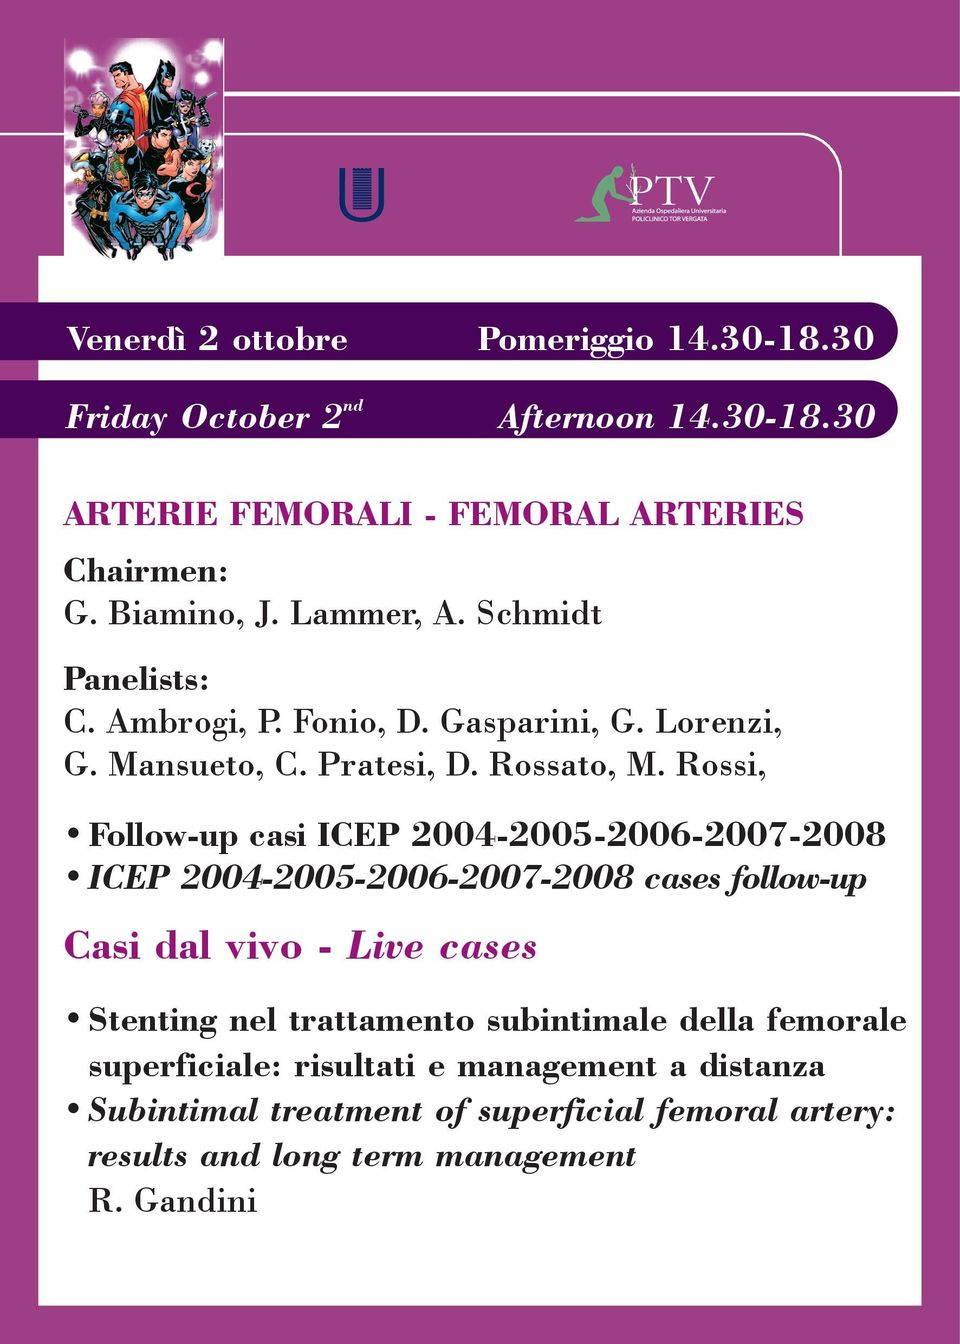 Rossi, Follow-up casi ICEP 2004-2005-2006-2007-2008 ICEP 2004-2005-2006-2007-2008 cases follow-up Stenting nel trattamento subintimale